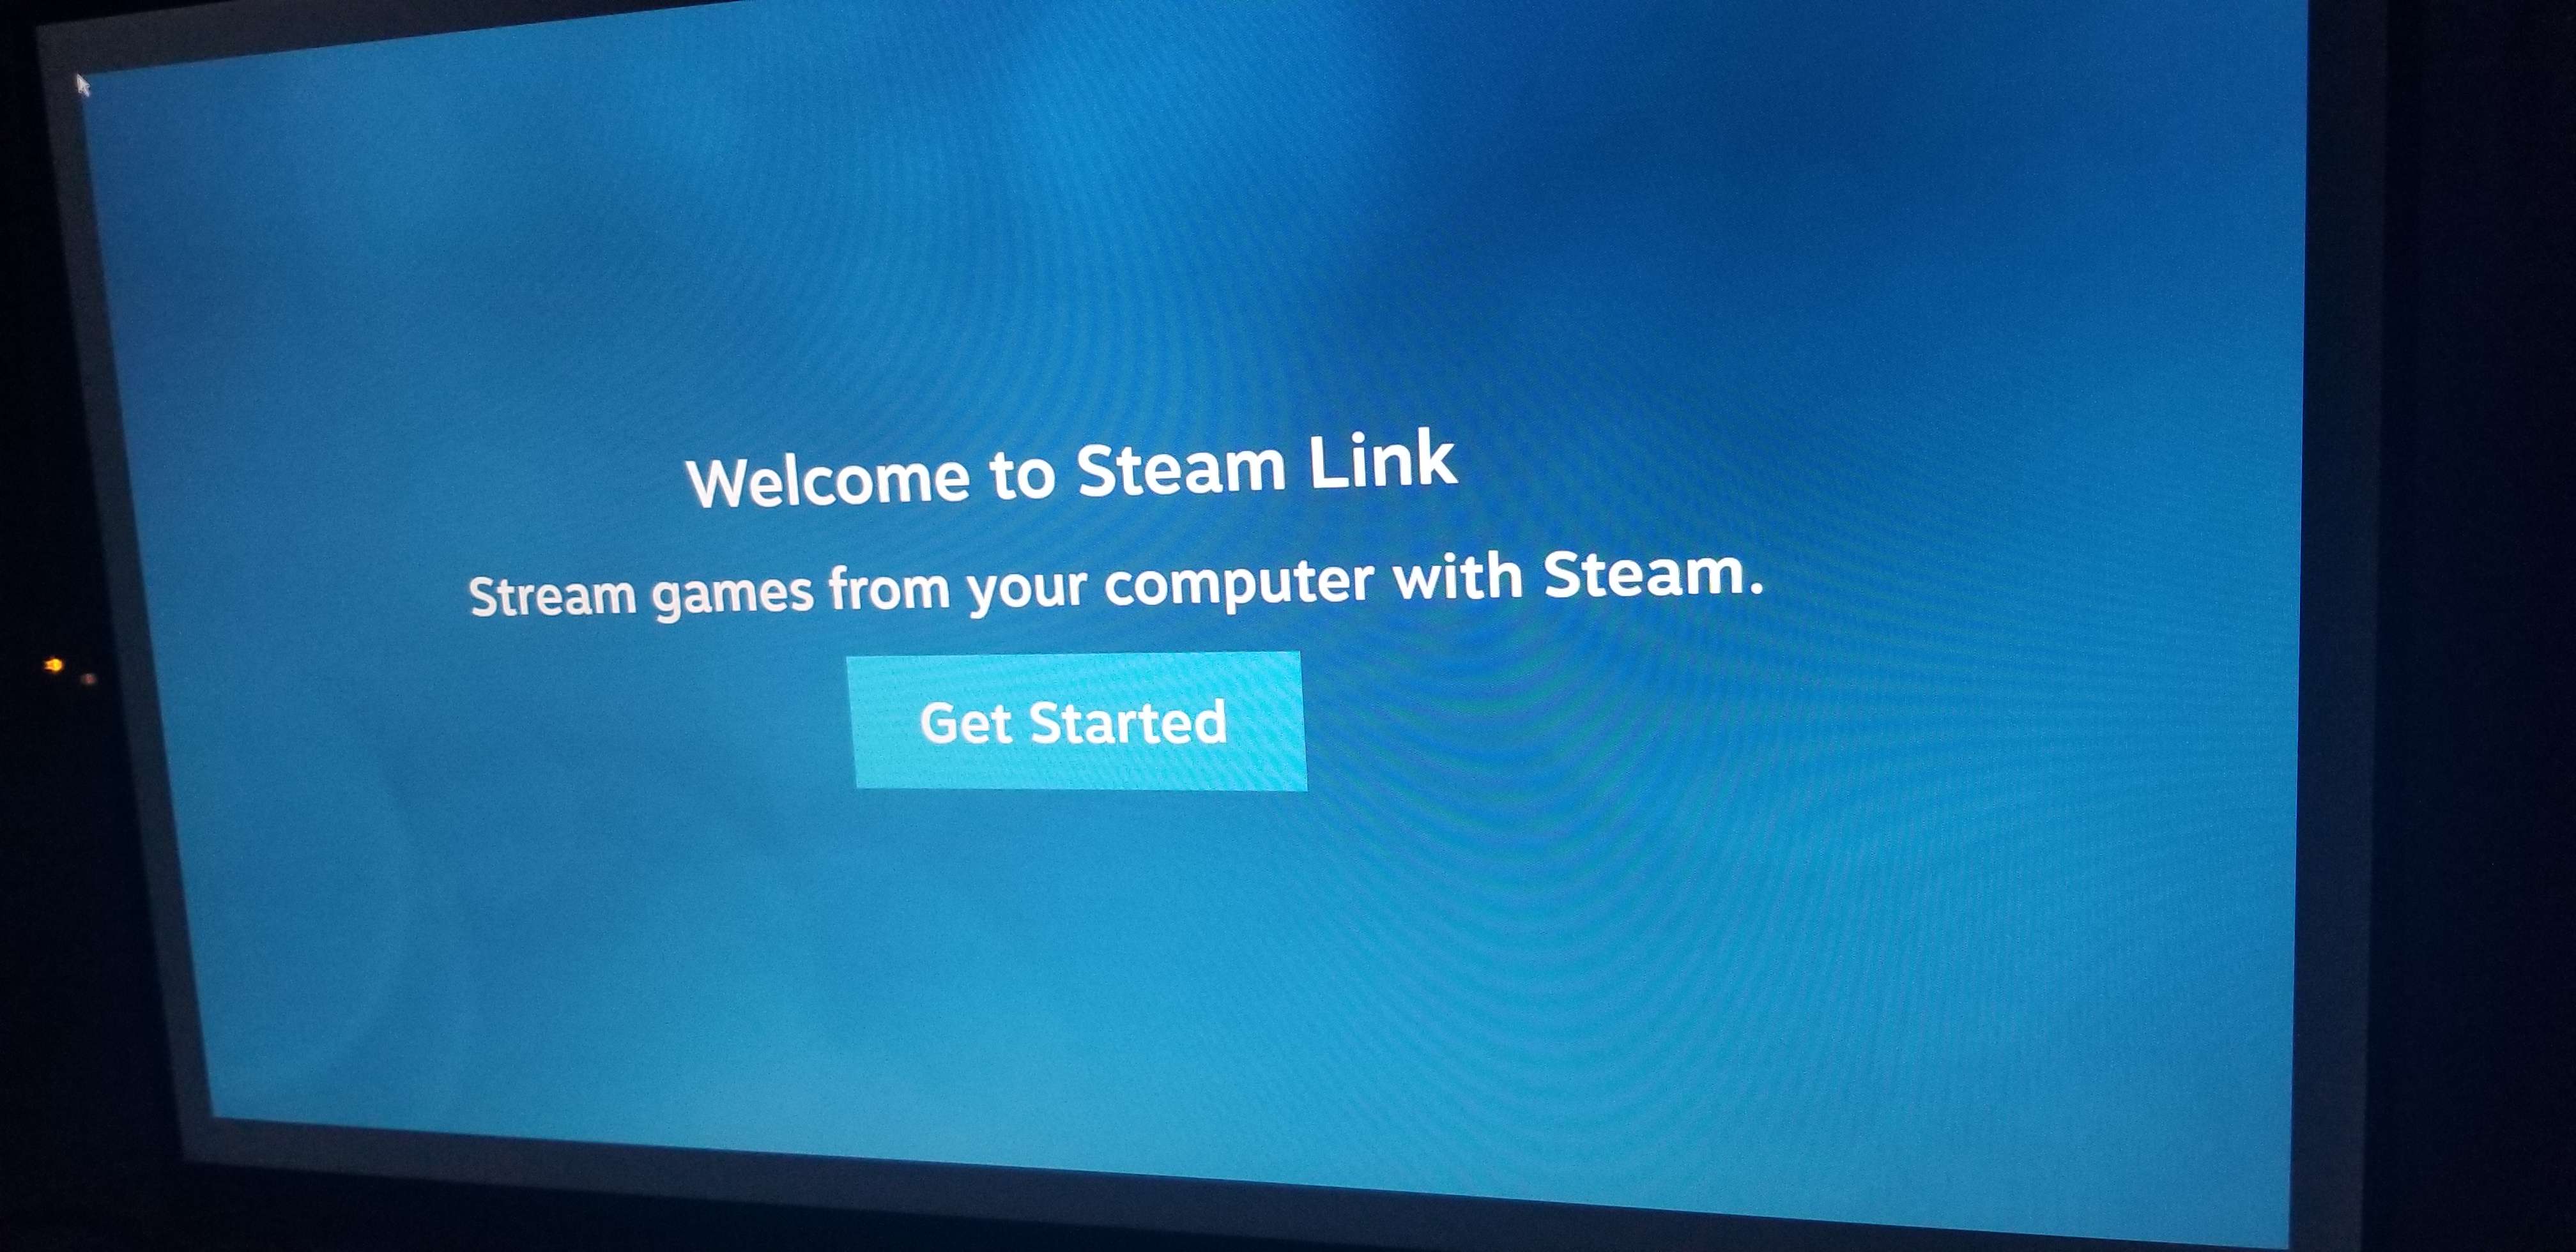 Steam Link Welcome